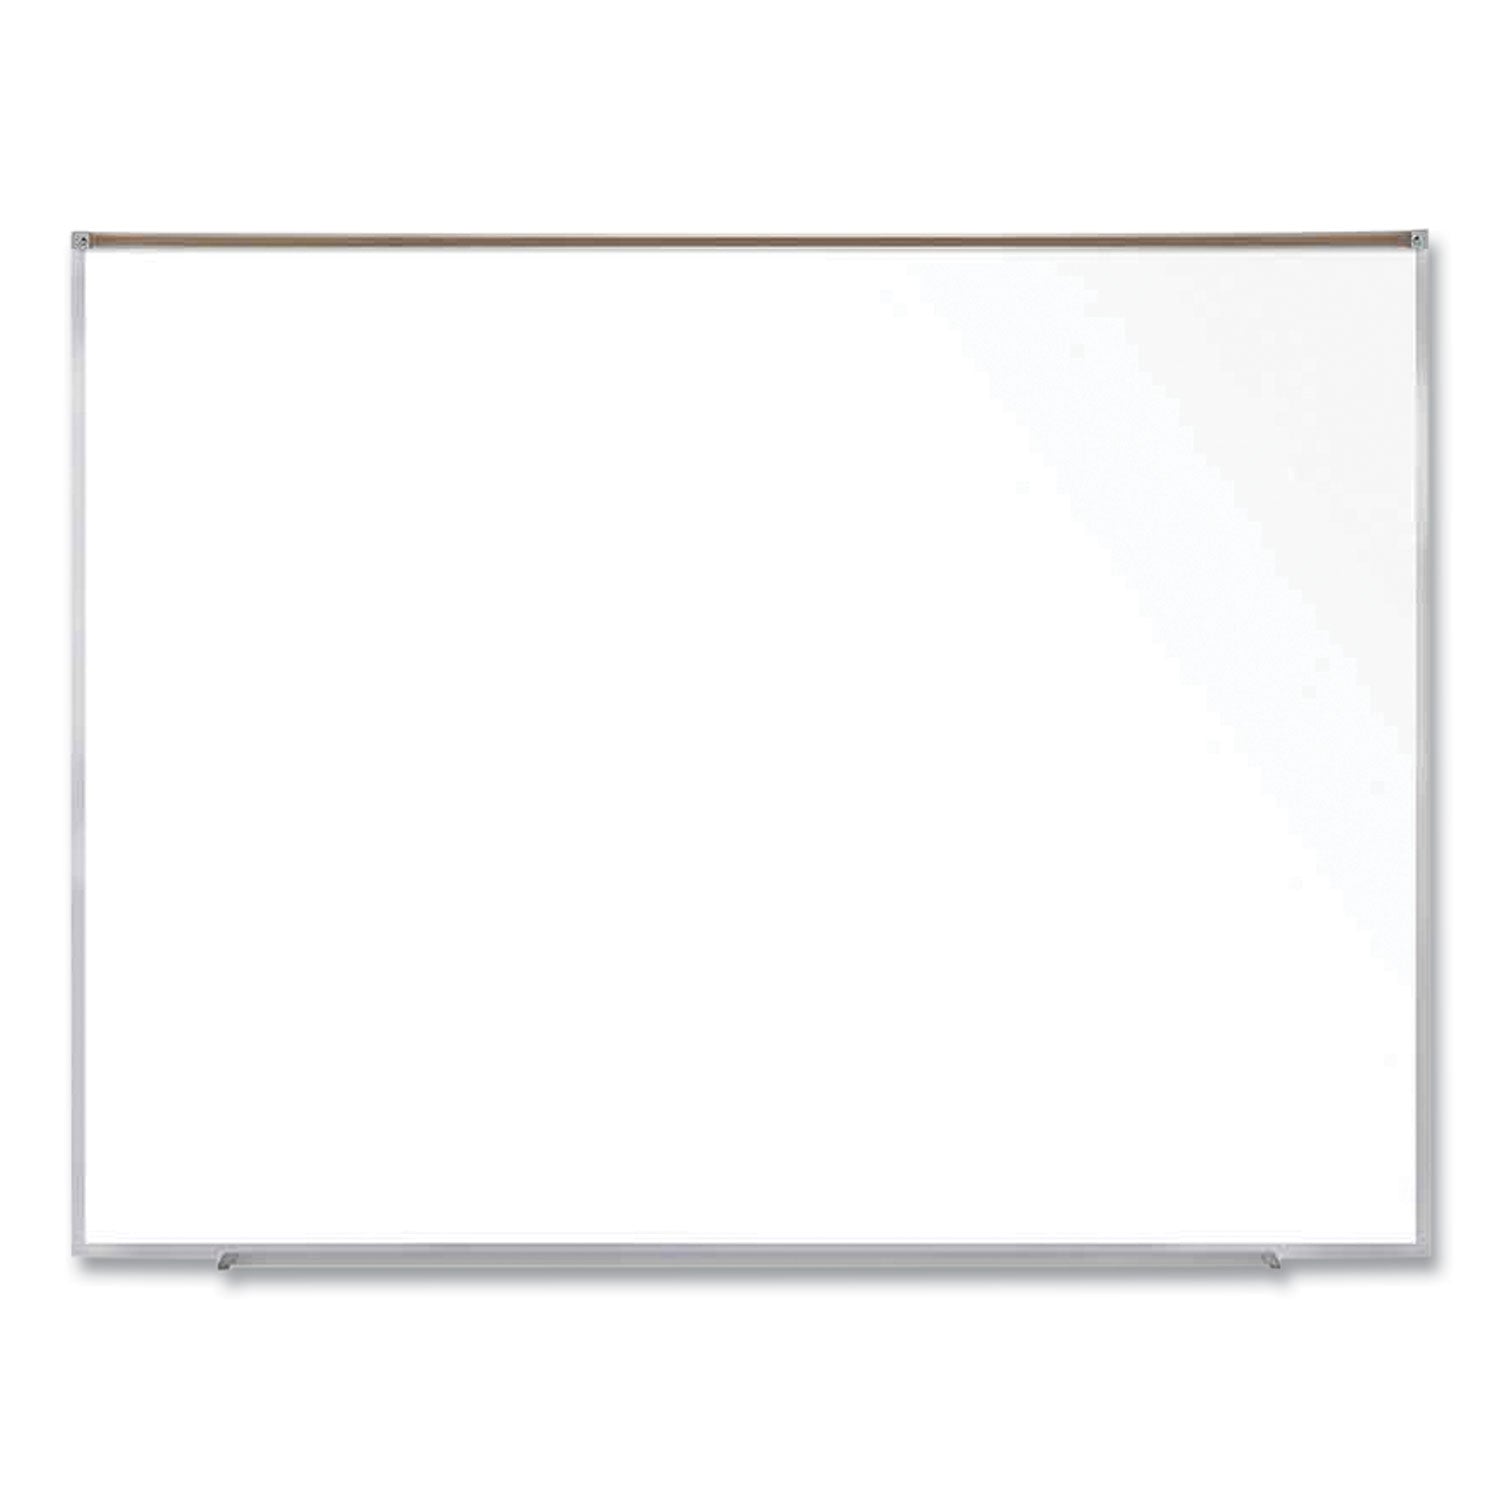 magnetic-porcelain-whiteboard-w-satin-aluminum-frame-and-map-rail-725-x-6047-white-surface-ships-in-7-10-business-days_ghem1p561m - 1